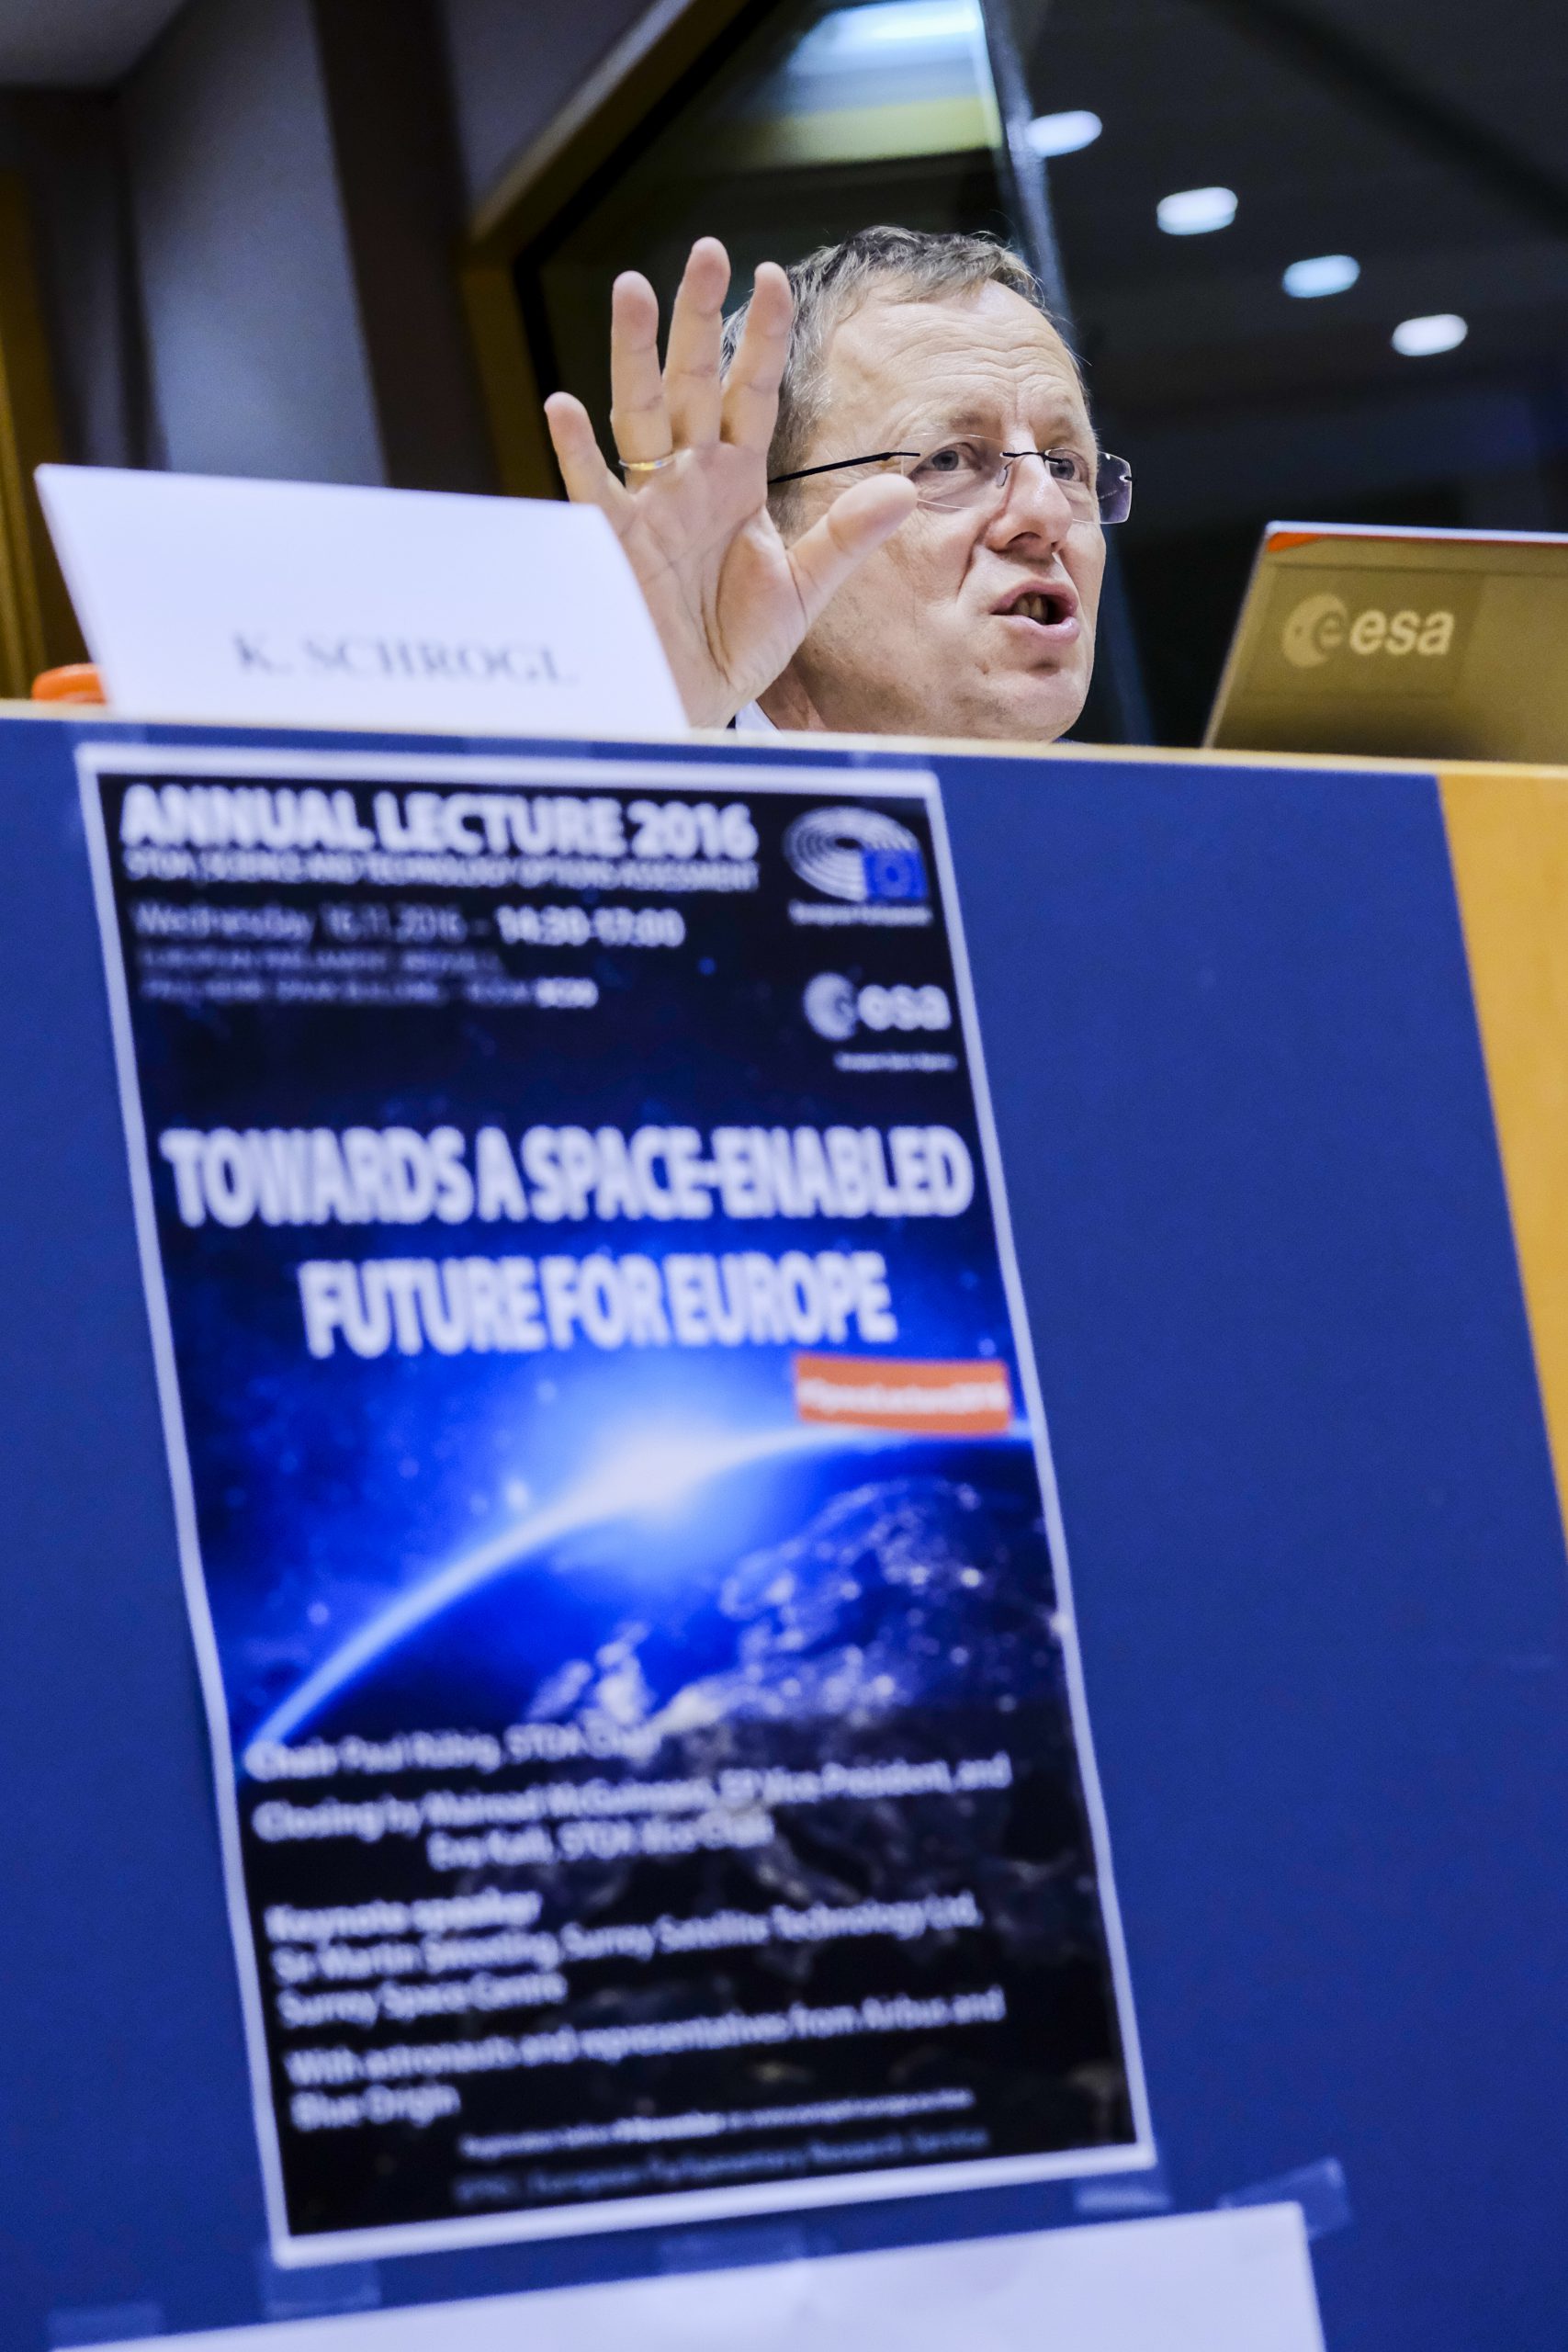 Towards a space-enabled future for Europe